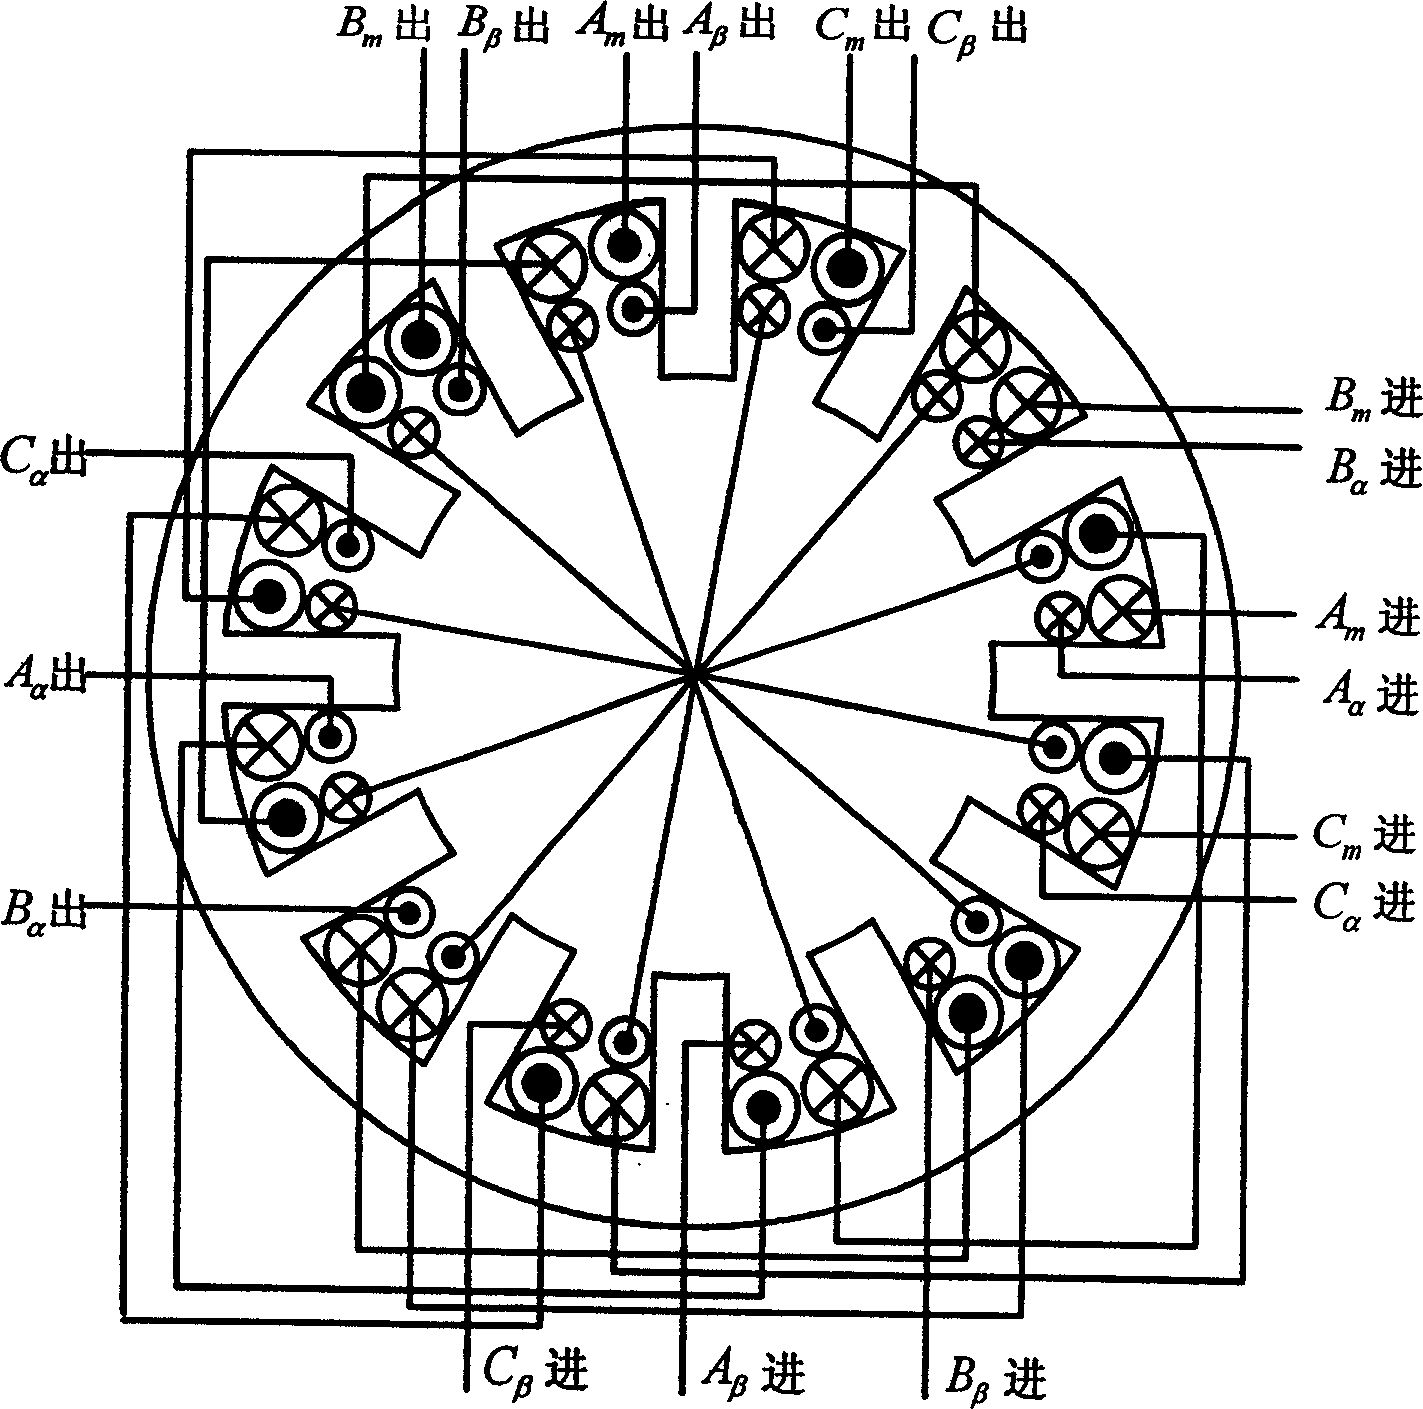 Bearing-free switch magnetic-resistance starting generator and control method